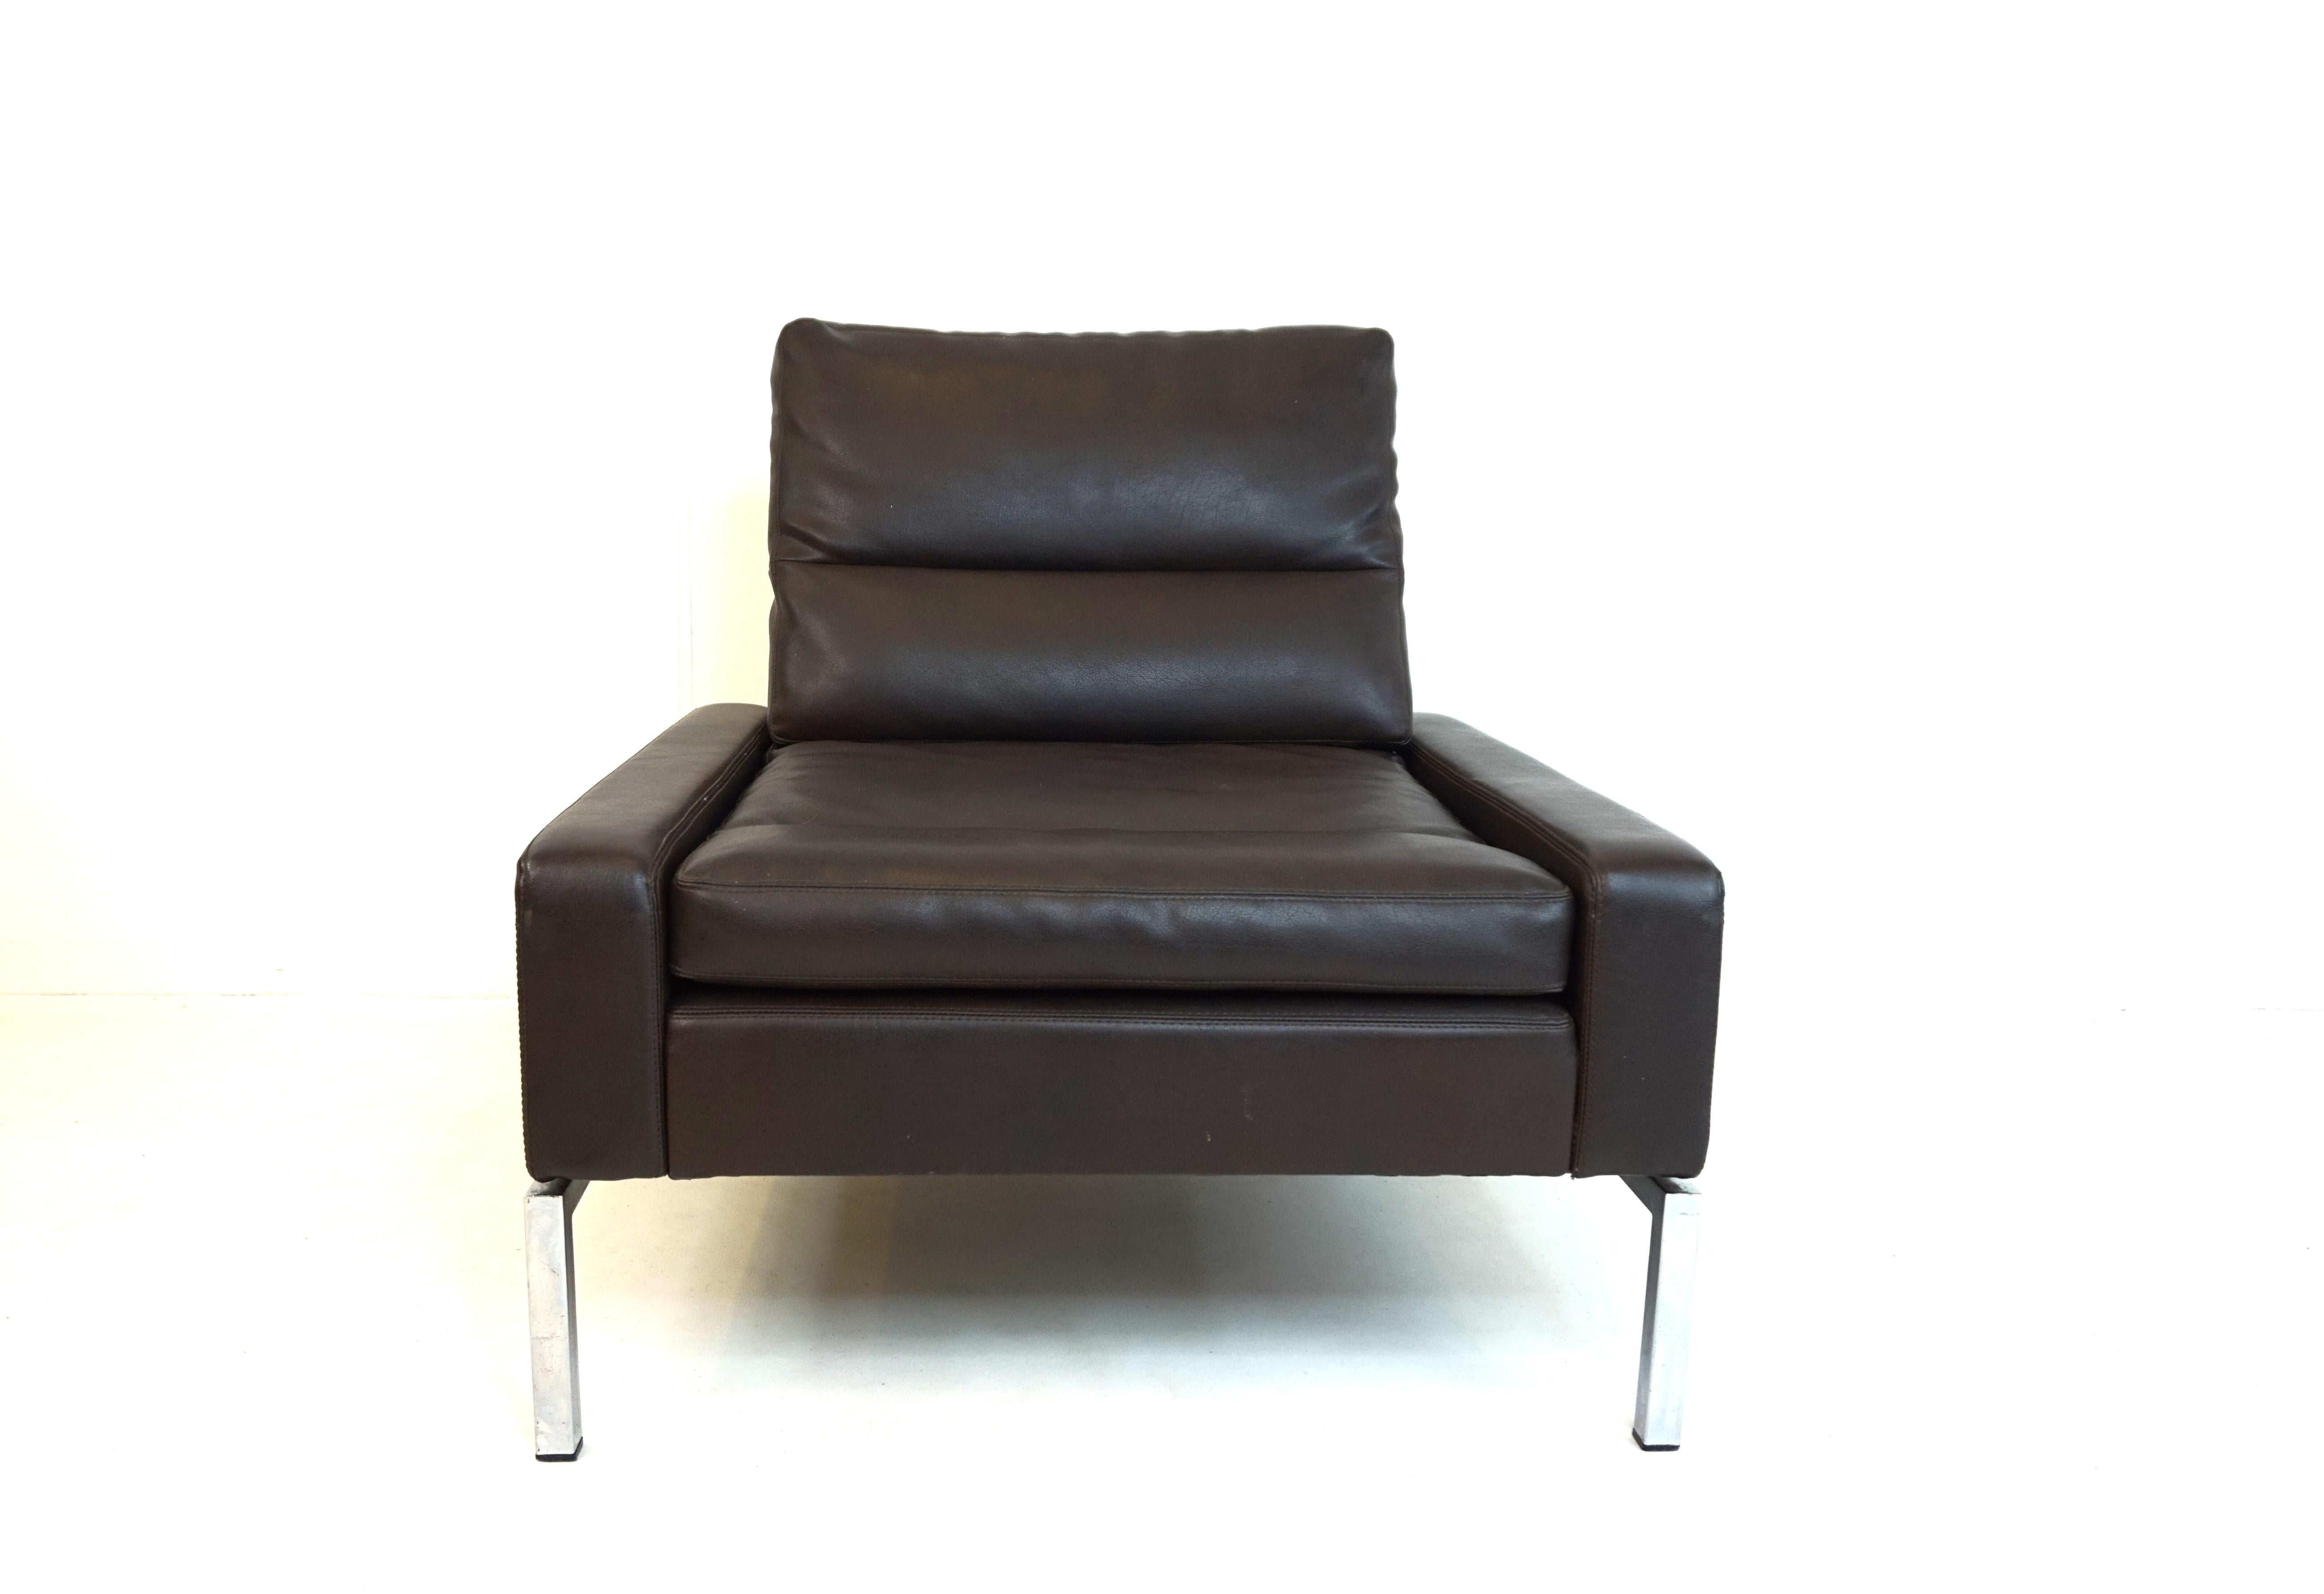 This lounge chair is upholstered in dark brown faux leather and is in excellent condition. The leather cover of the body and the cushions show hardly any signs of wear, the seating comfort is impeccable and the chrome frame is in good condition. The